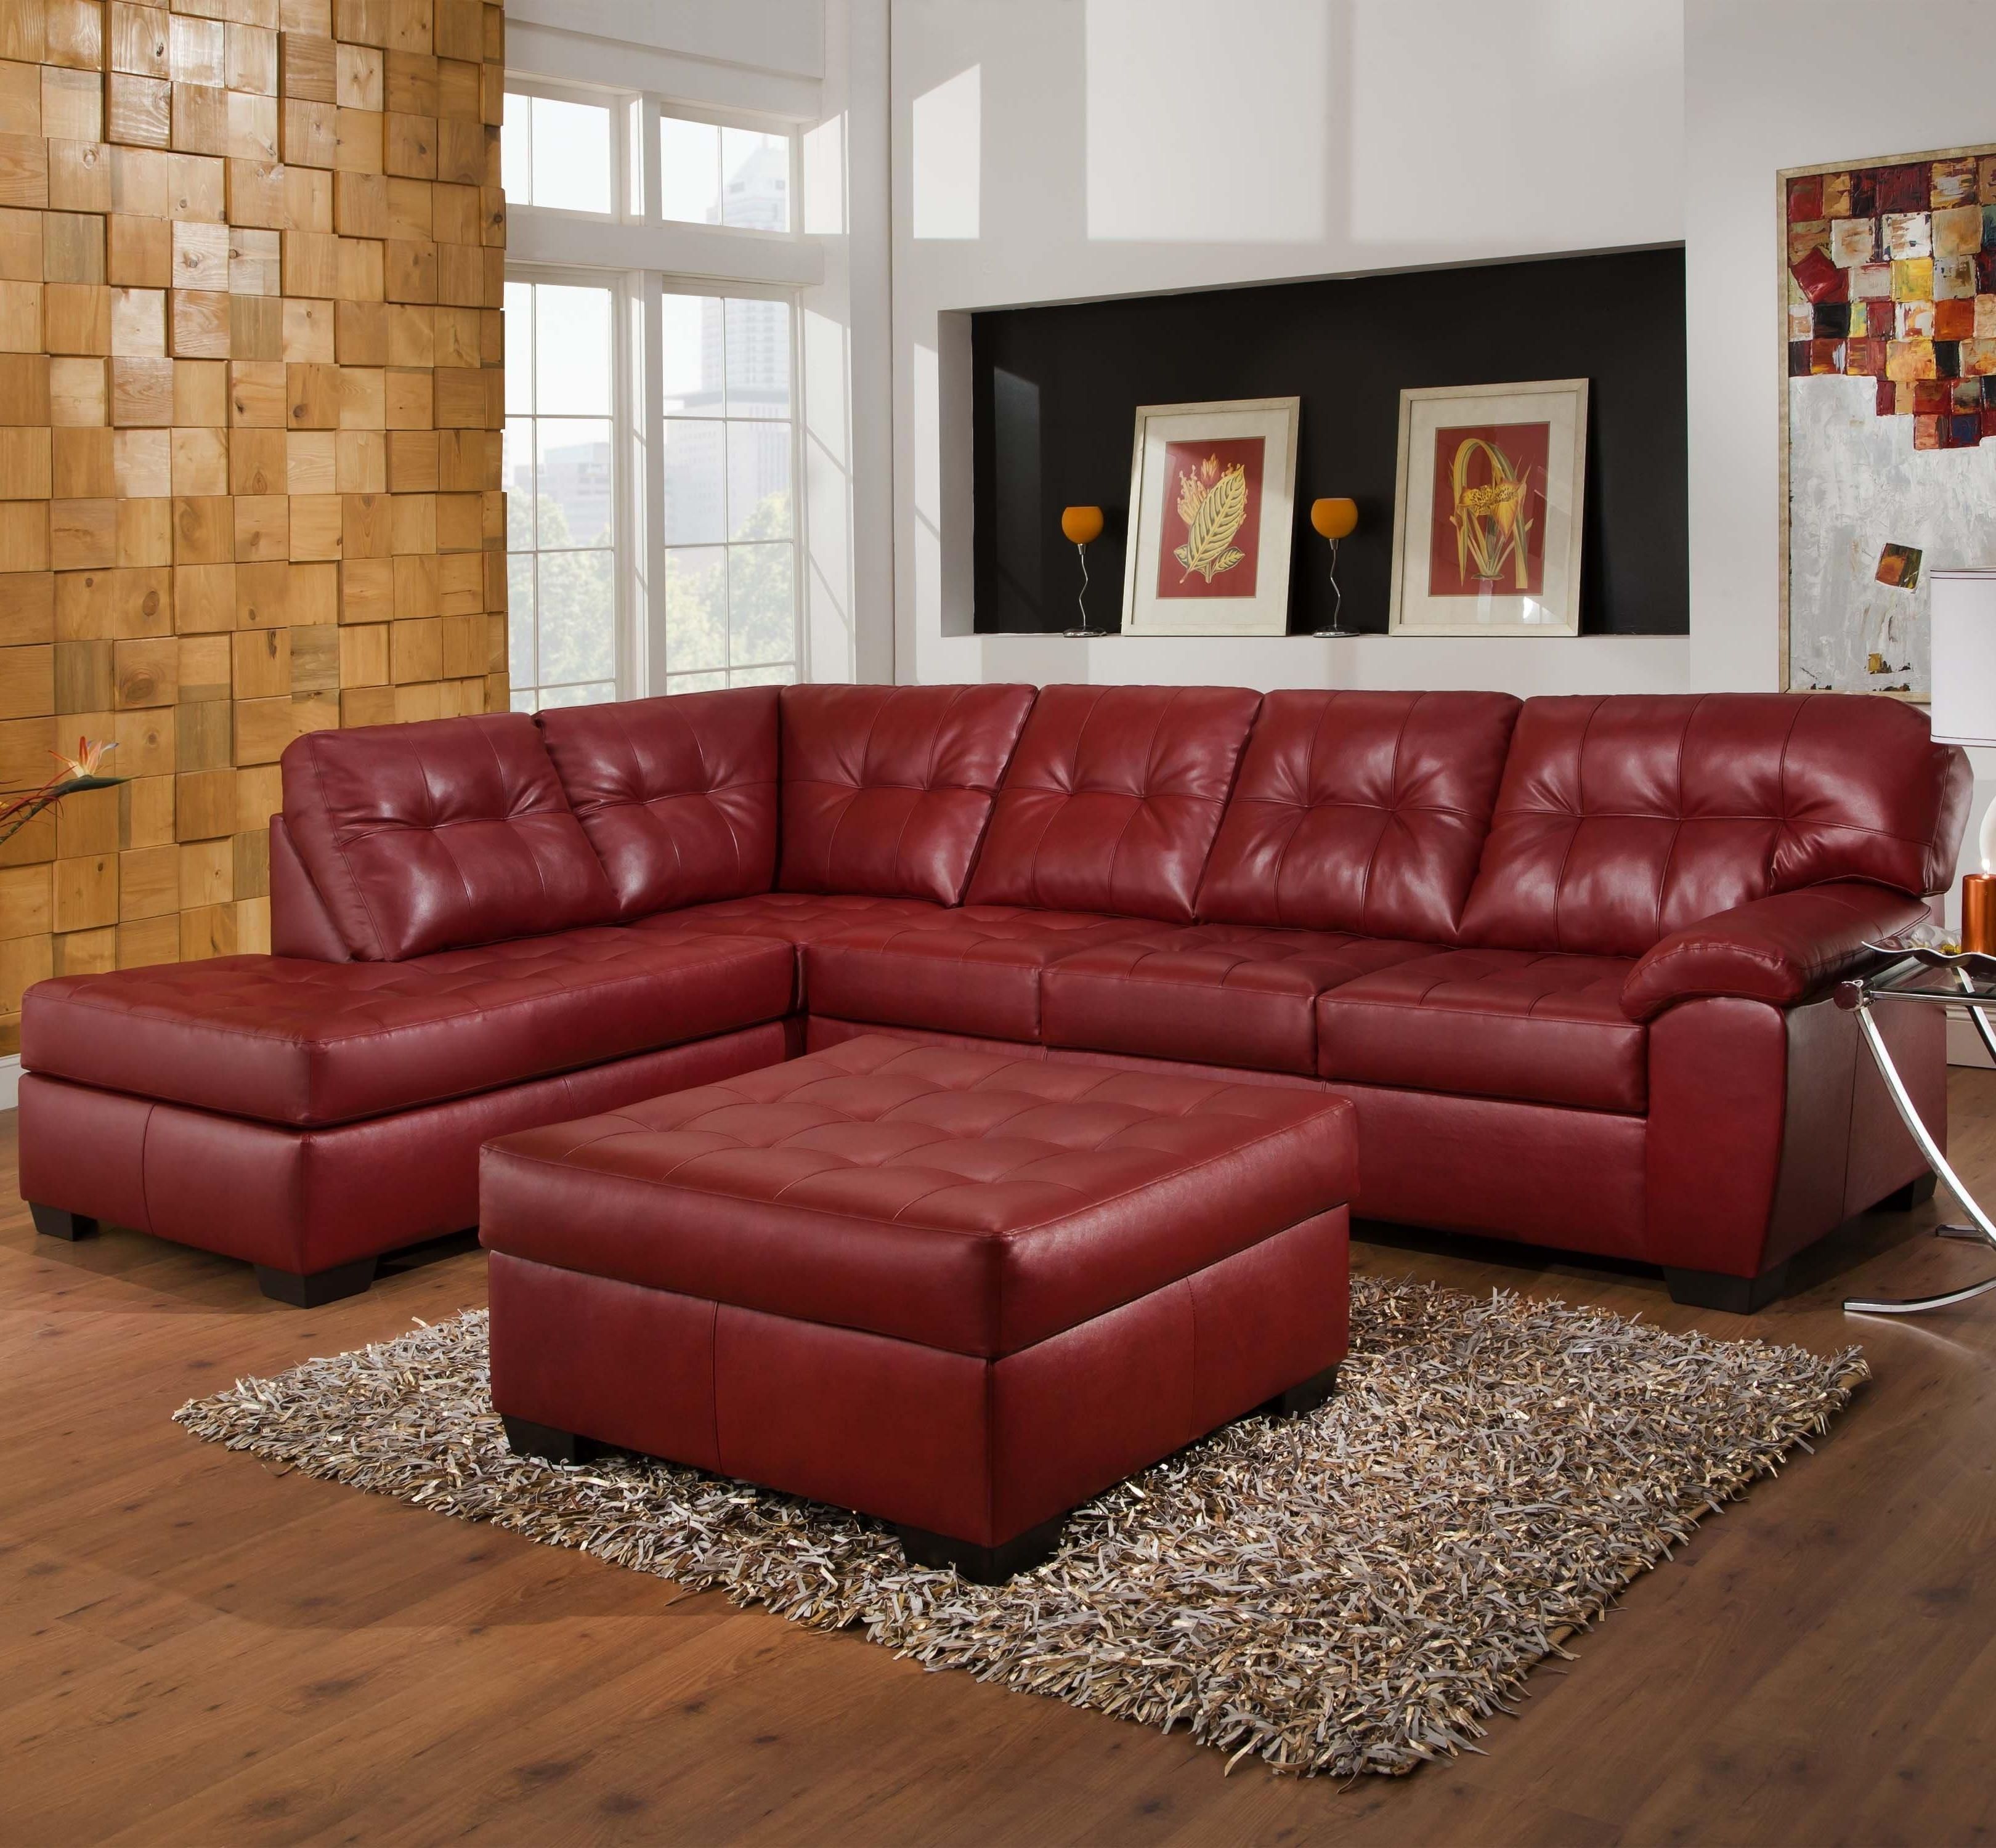 9569 2 Piece Sectional With Tufted Seats & Backsimmons With Regard To Most Recent Jackson Tn Sectional Sofas (View 4 of 20)